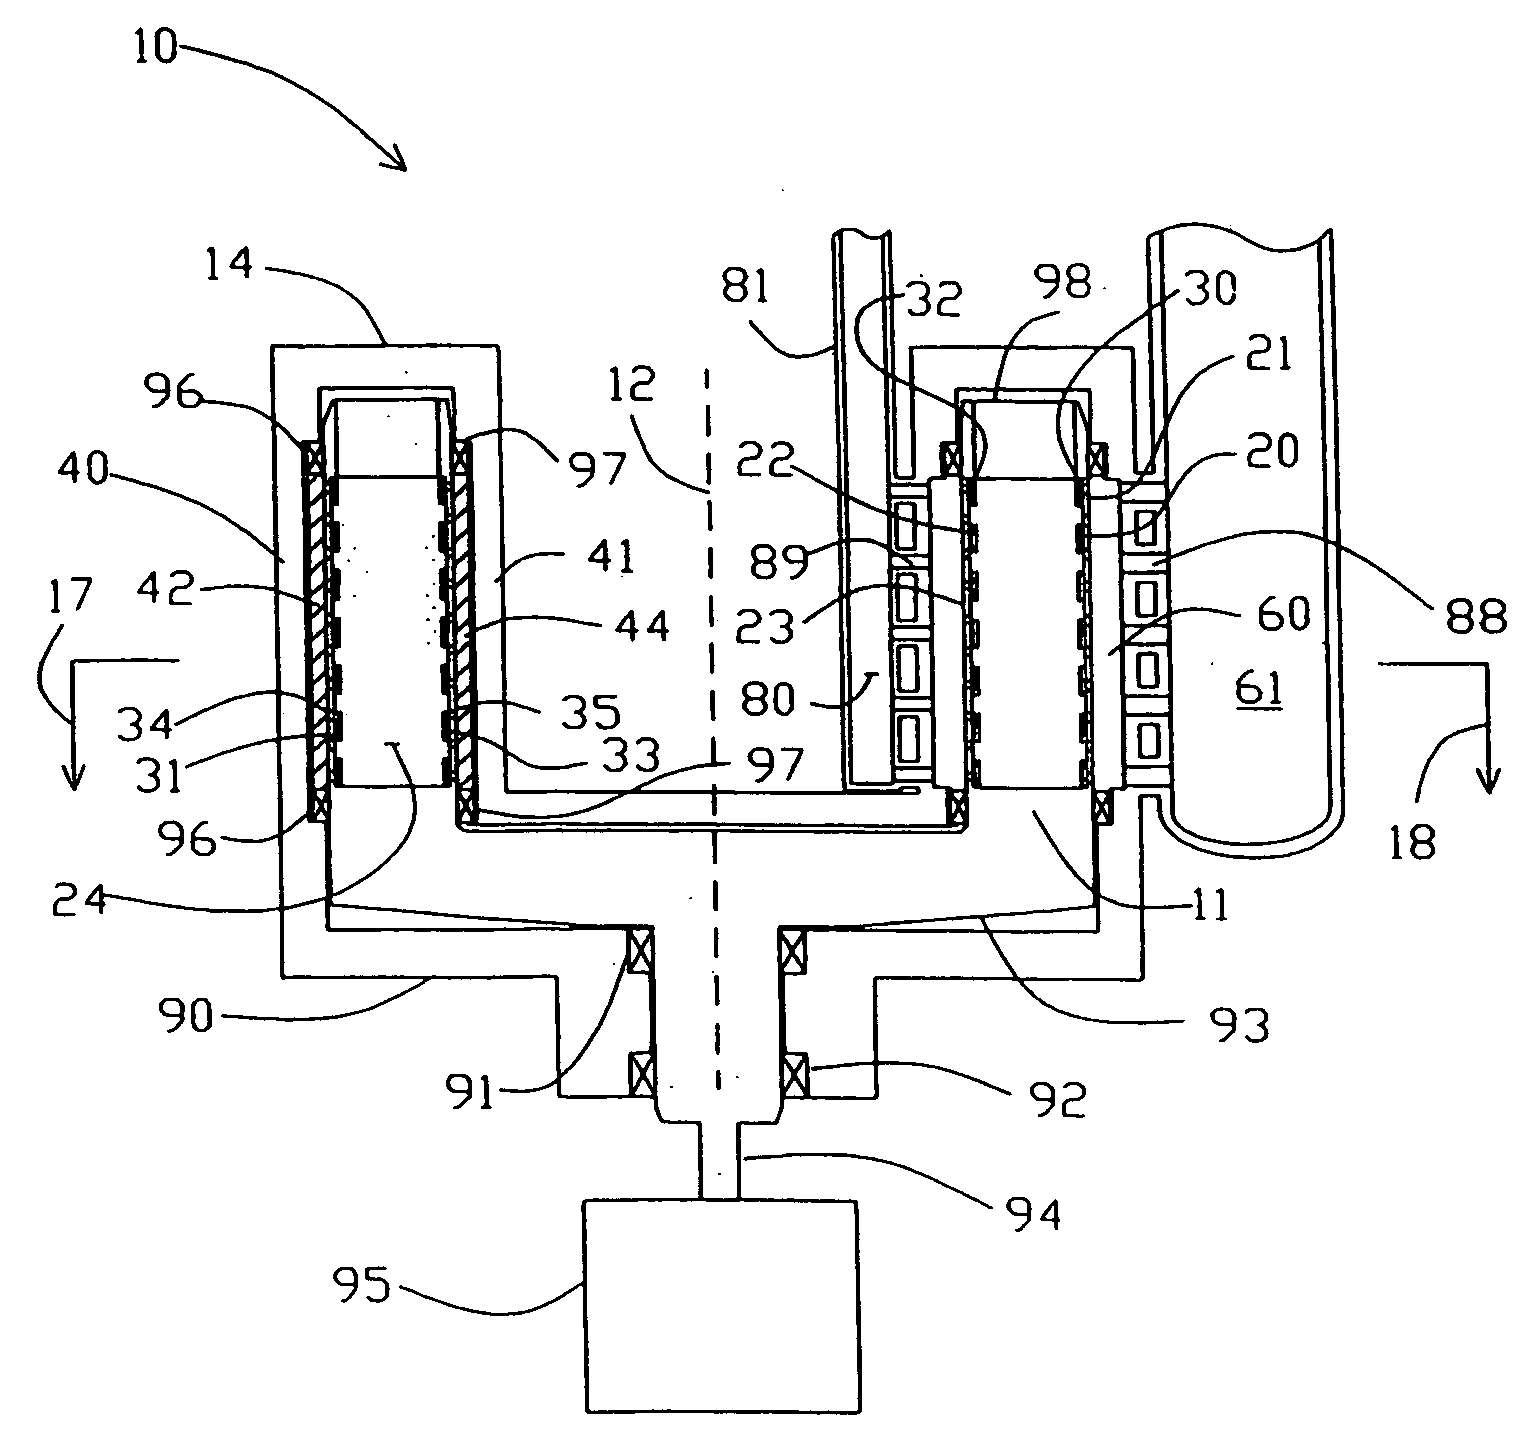 Electrical current generation system